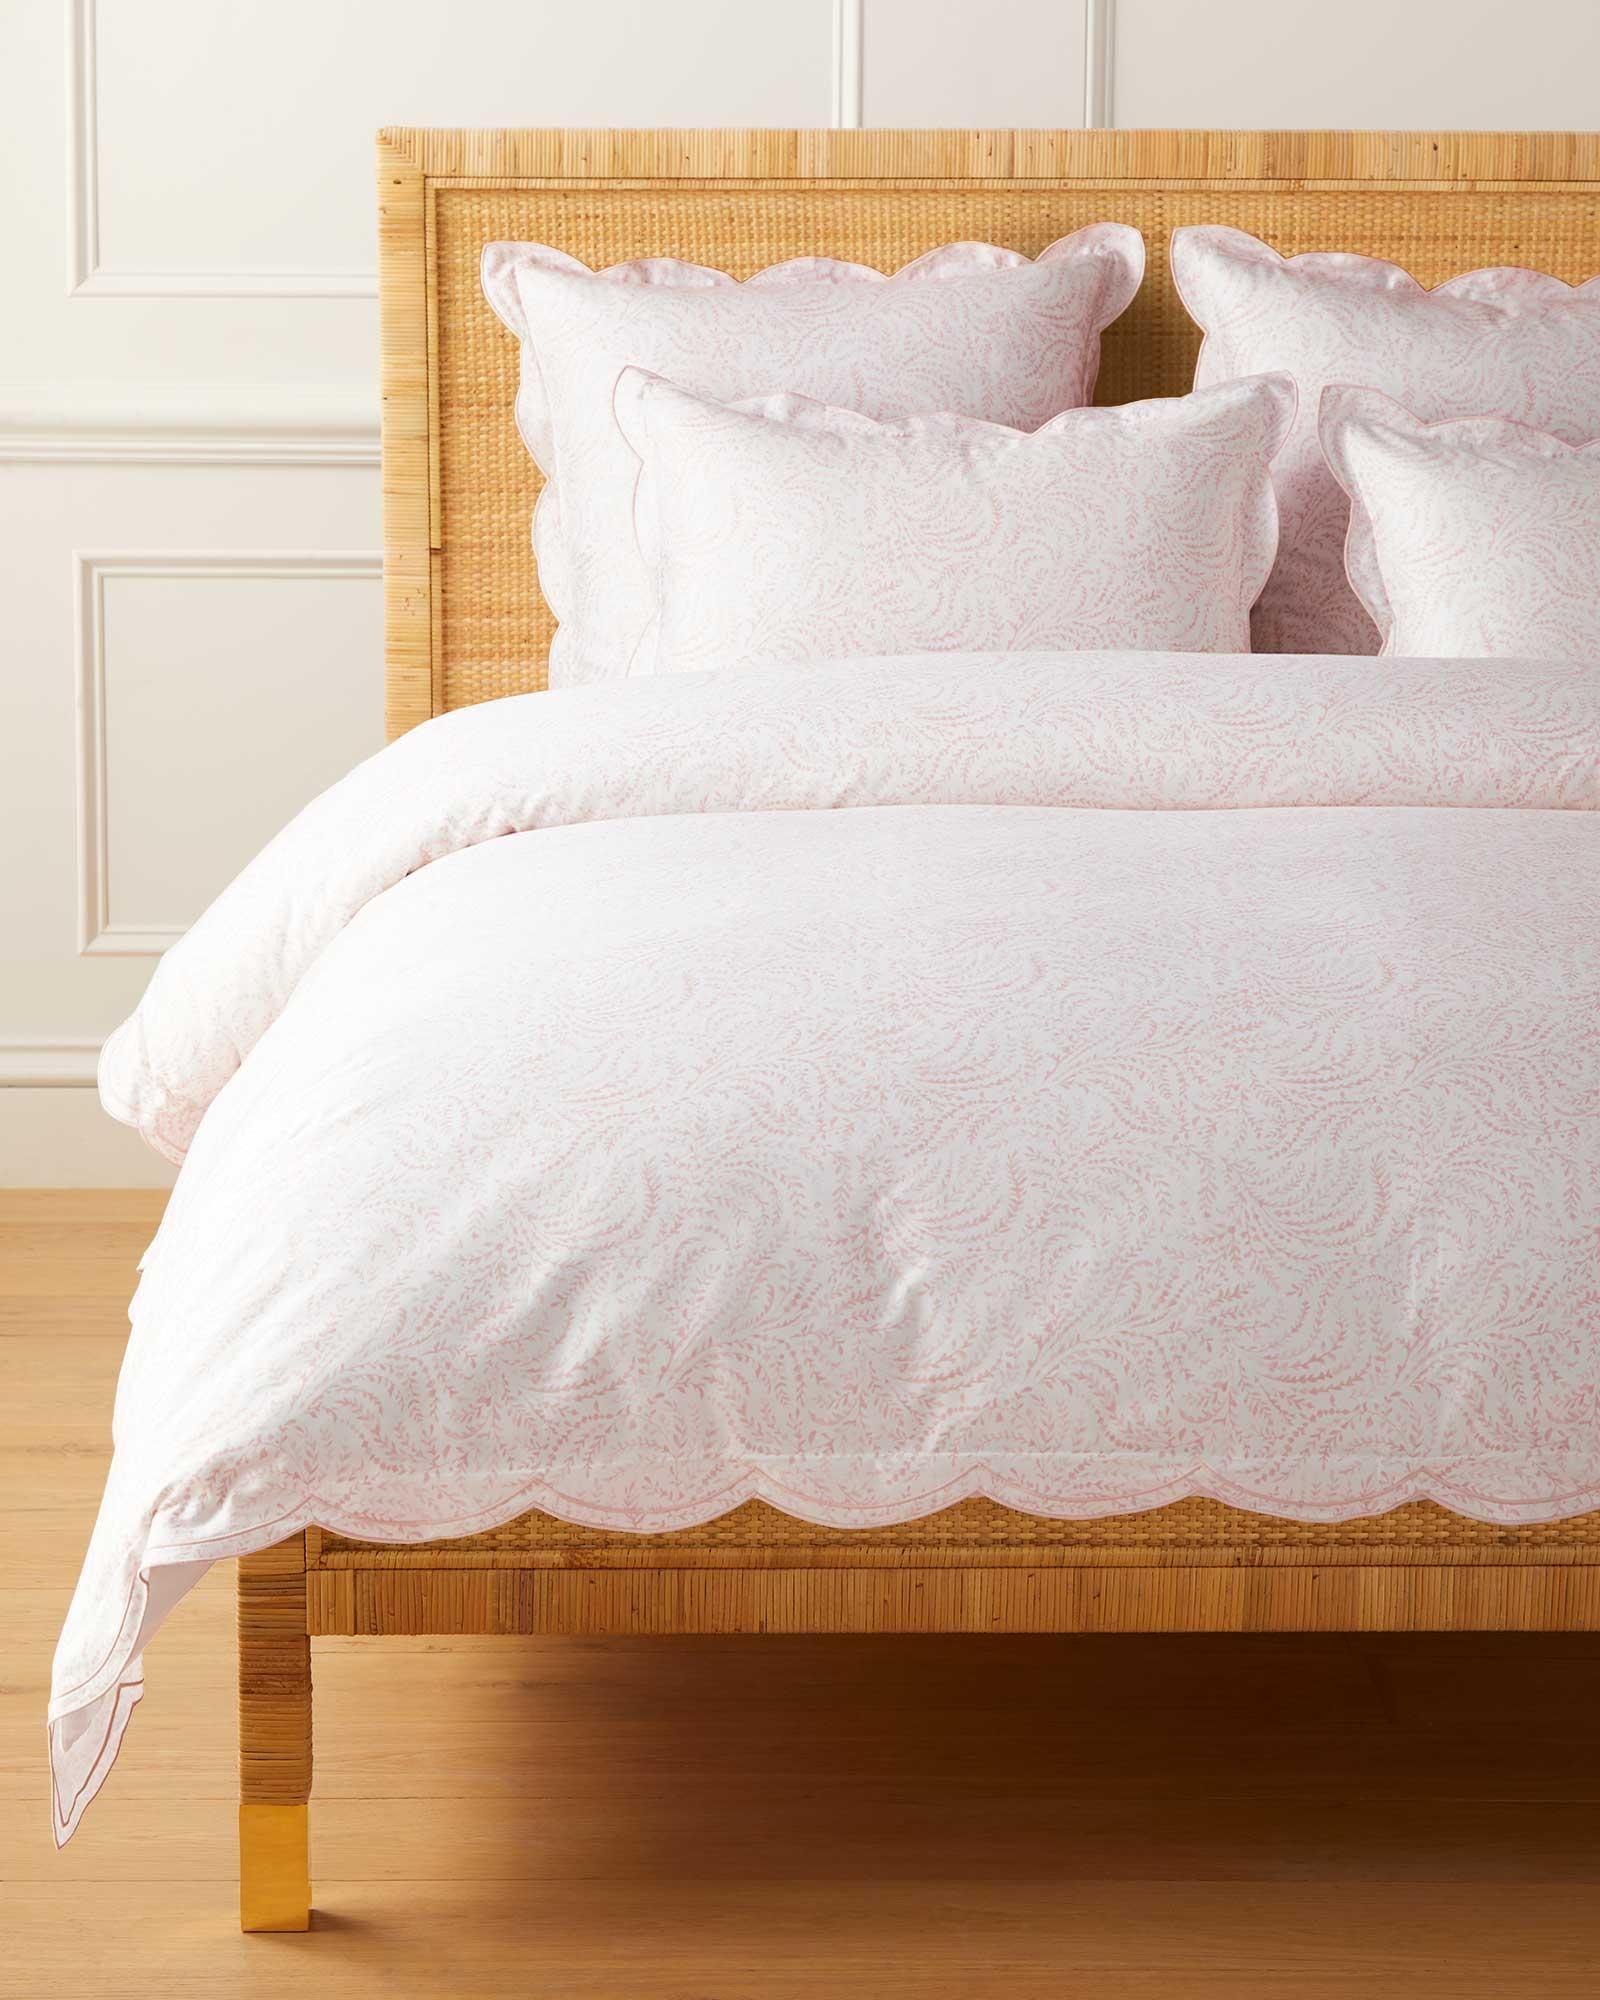 Priano Sateen Duvet Cover | Serena and Lily